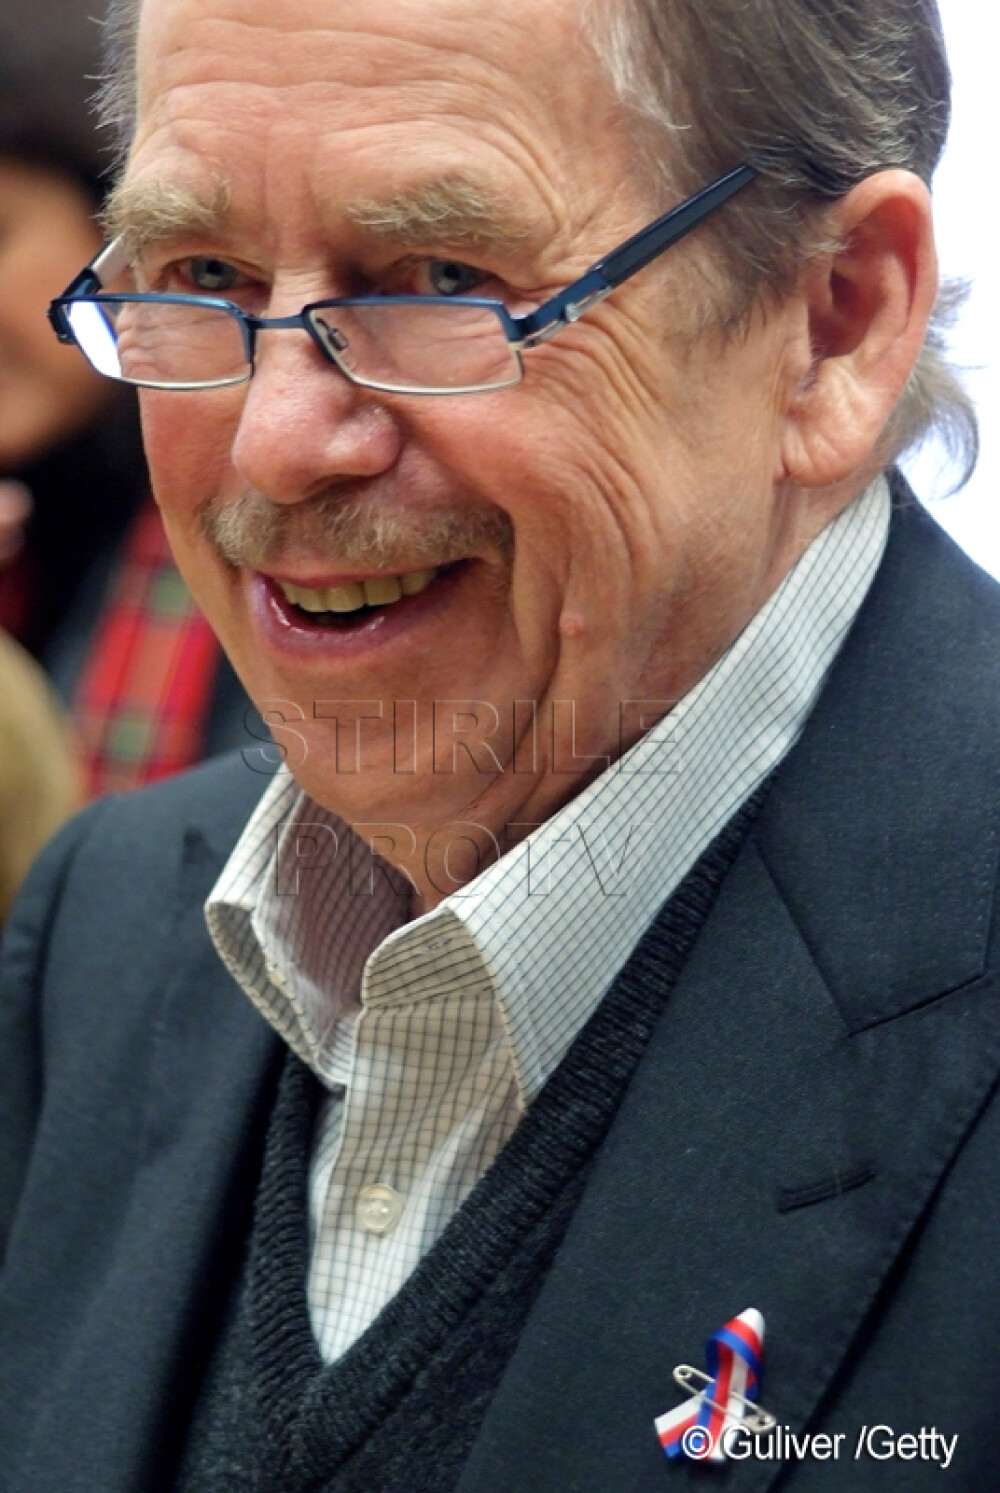 Vaclav Havel, omul care a adus 